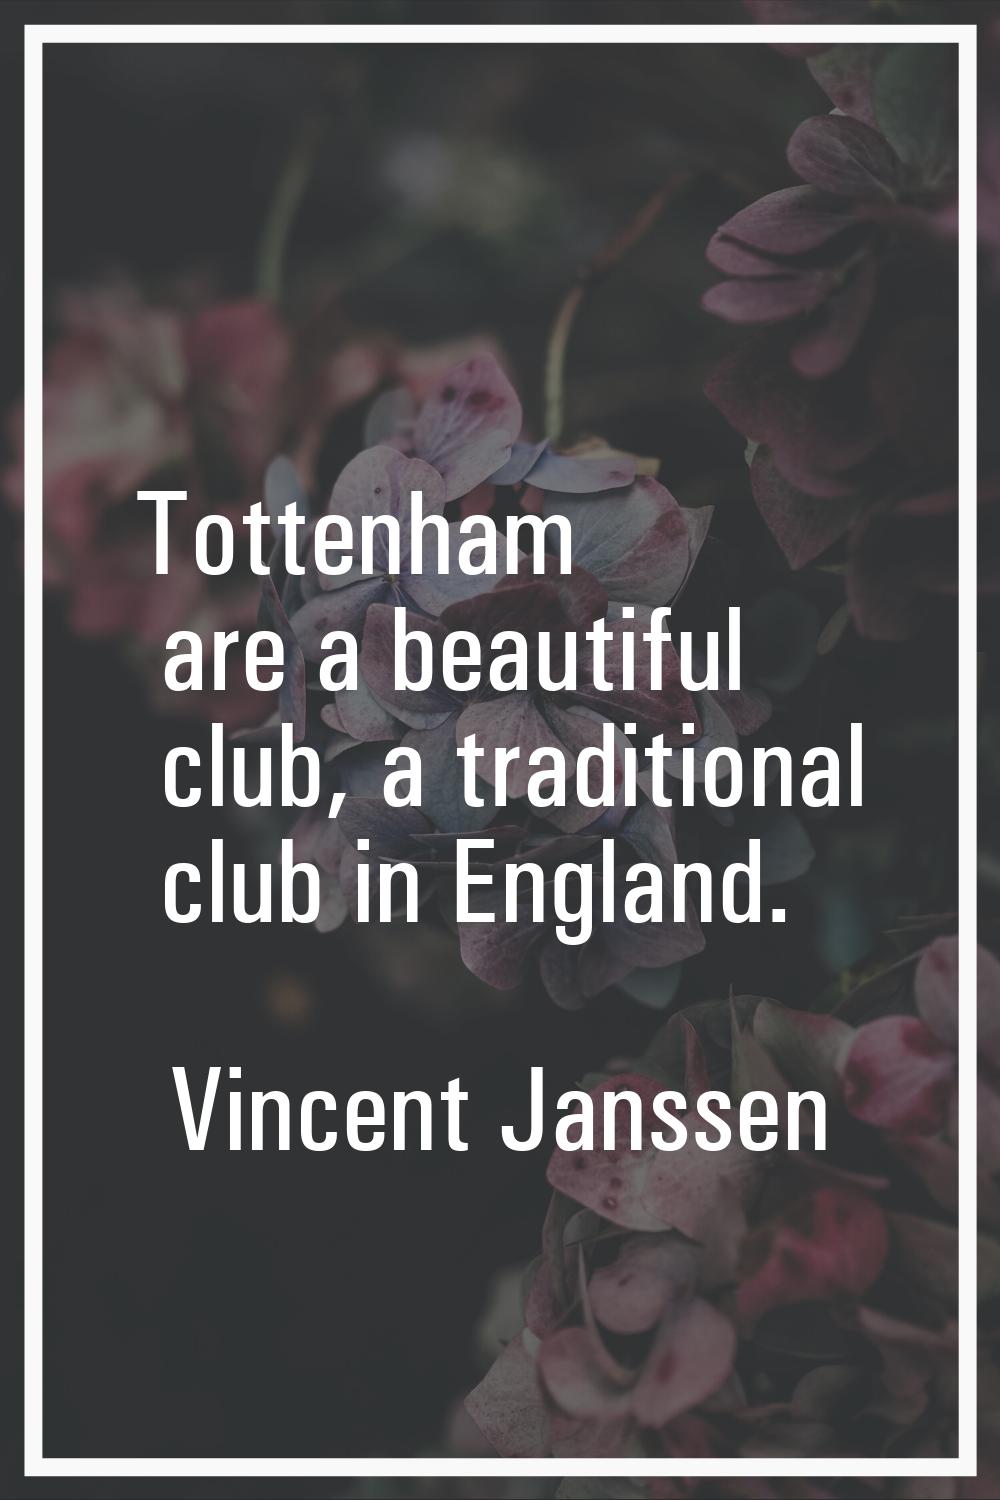 Tottenham are a beautiful club, a traditional club in England.